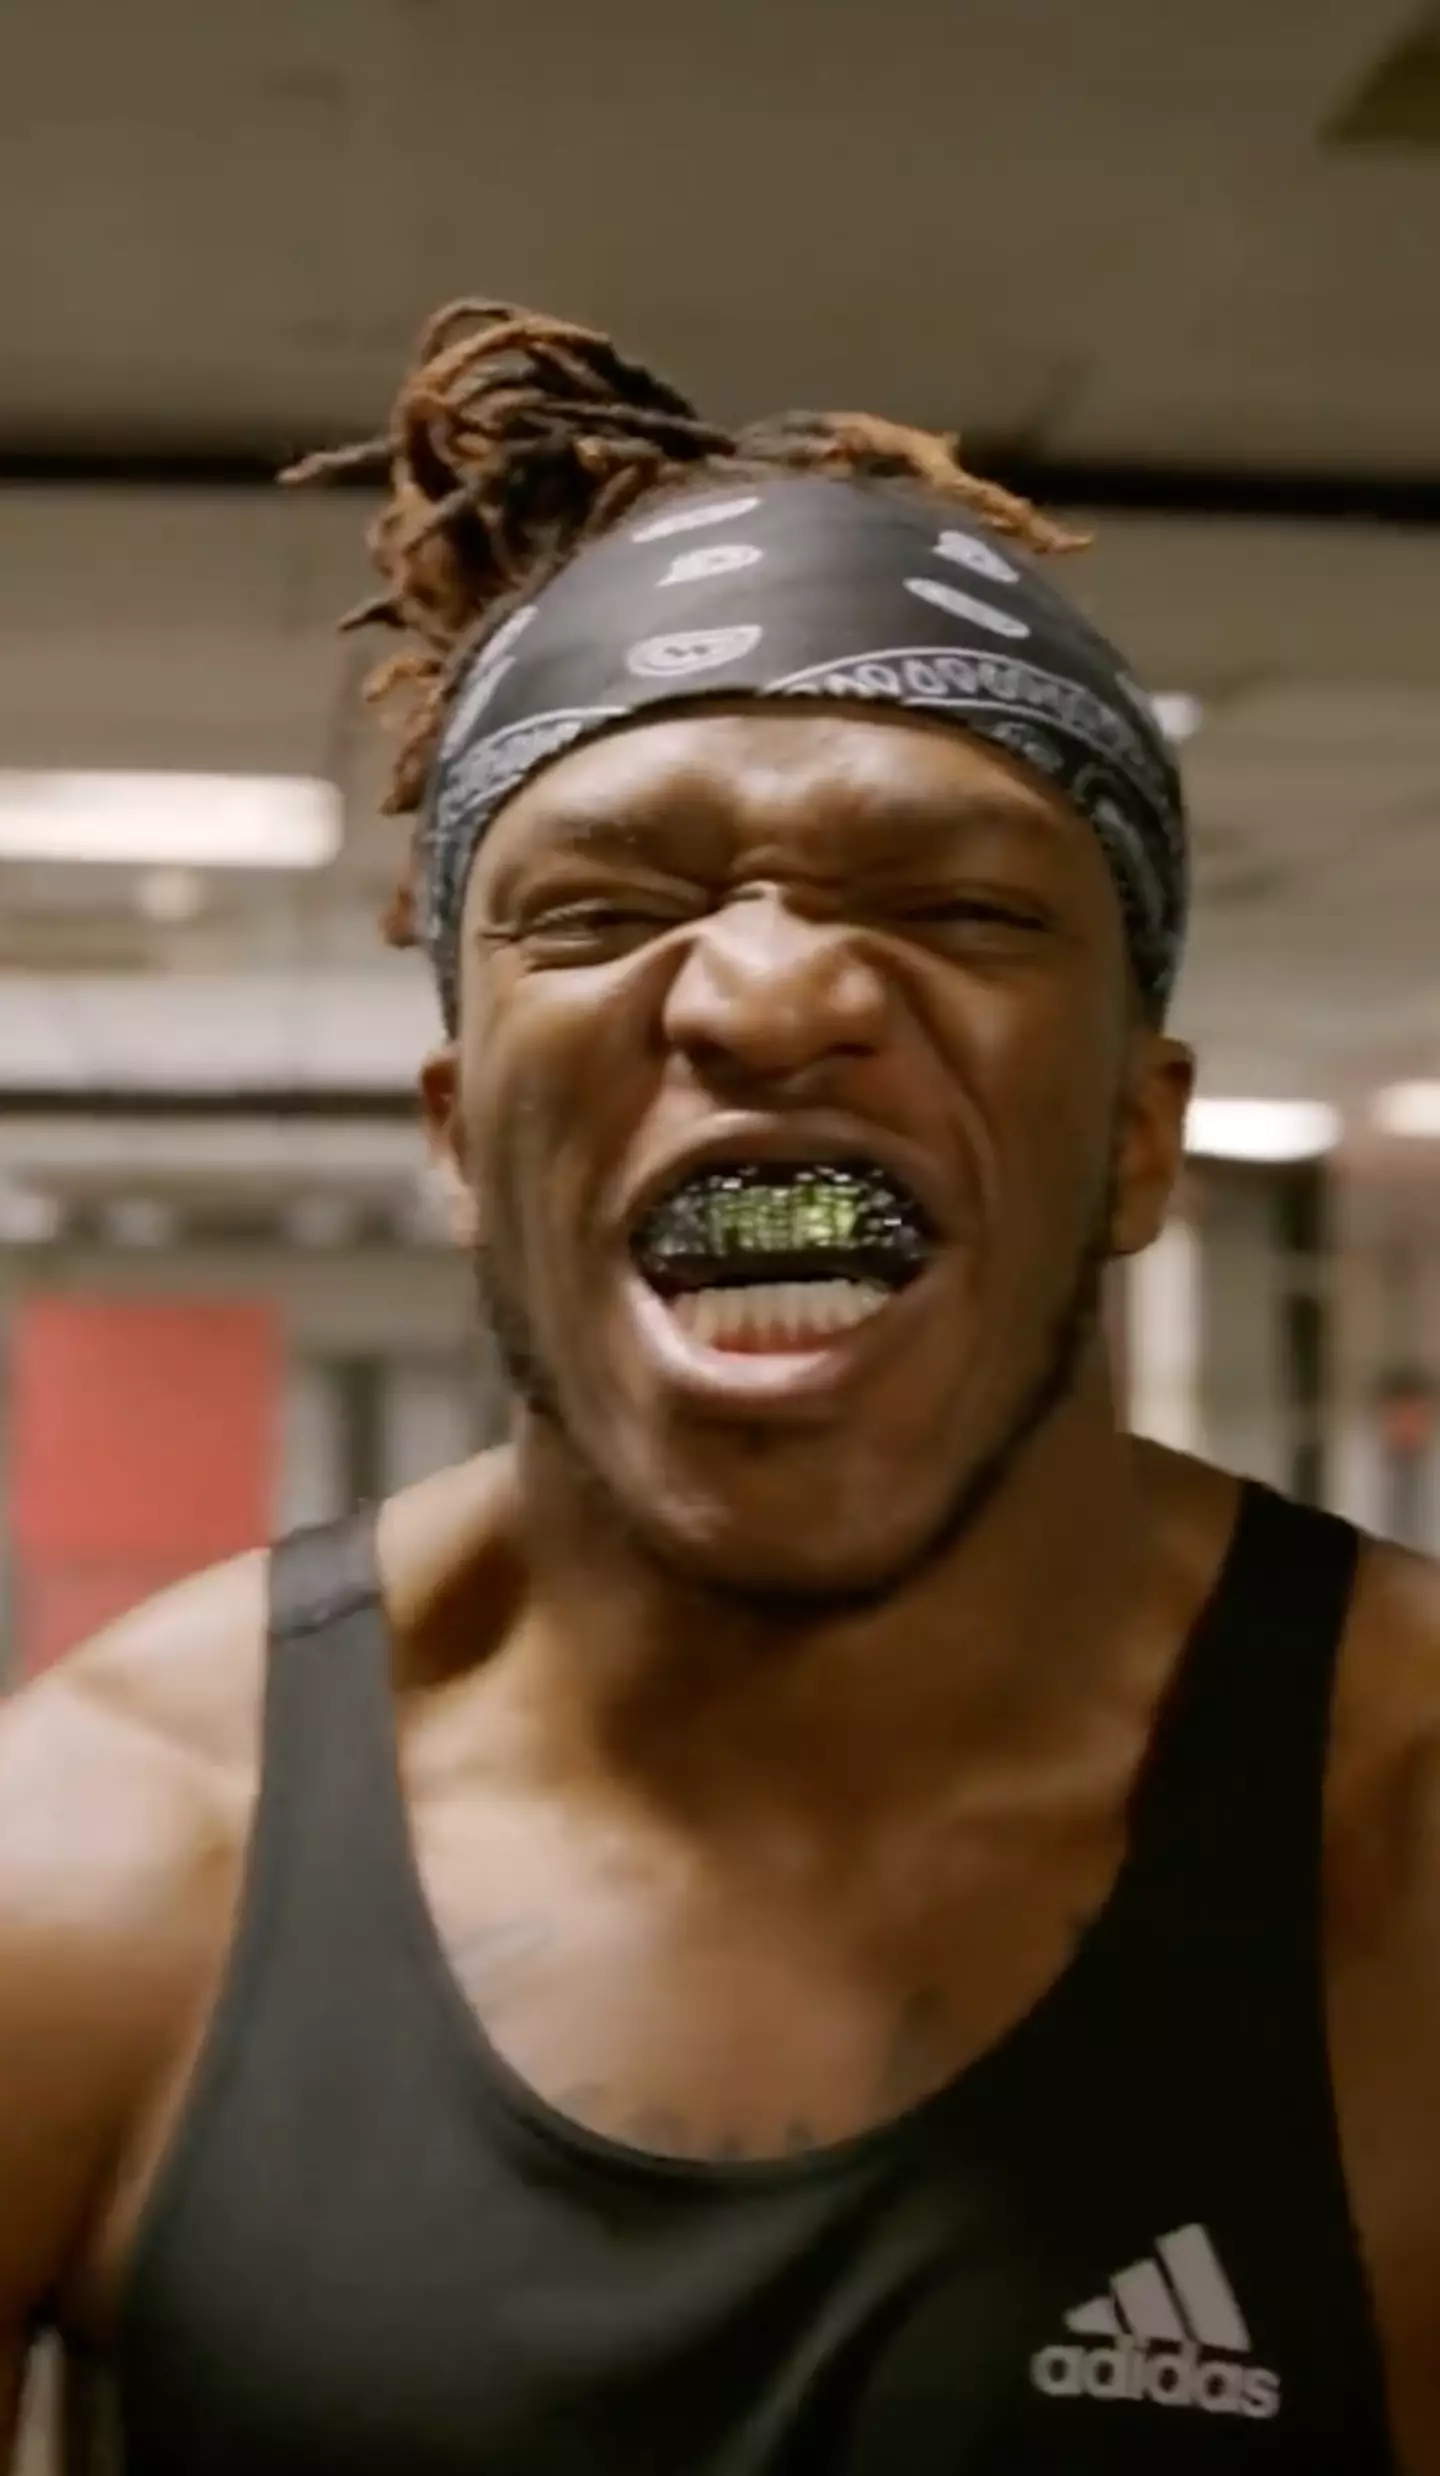 KSI's mouthguard is worth over £41,000.